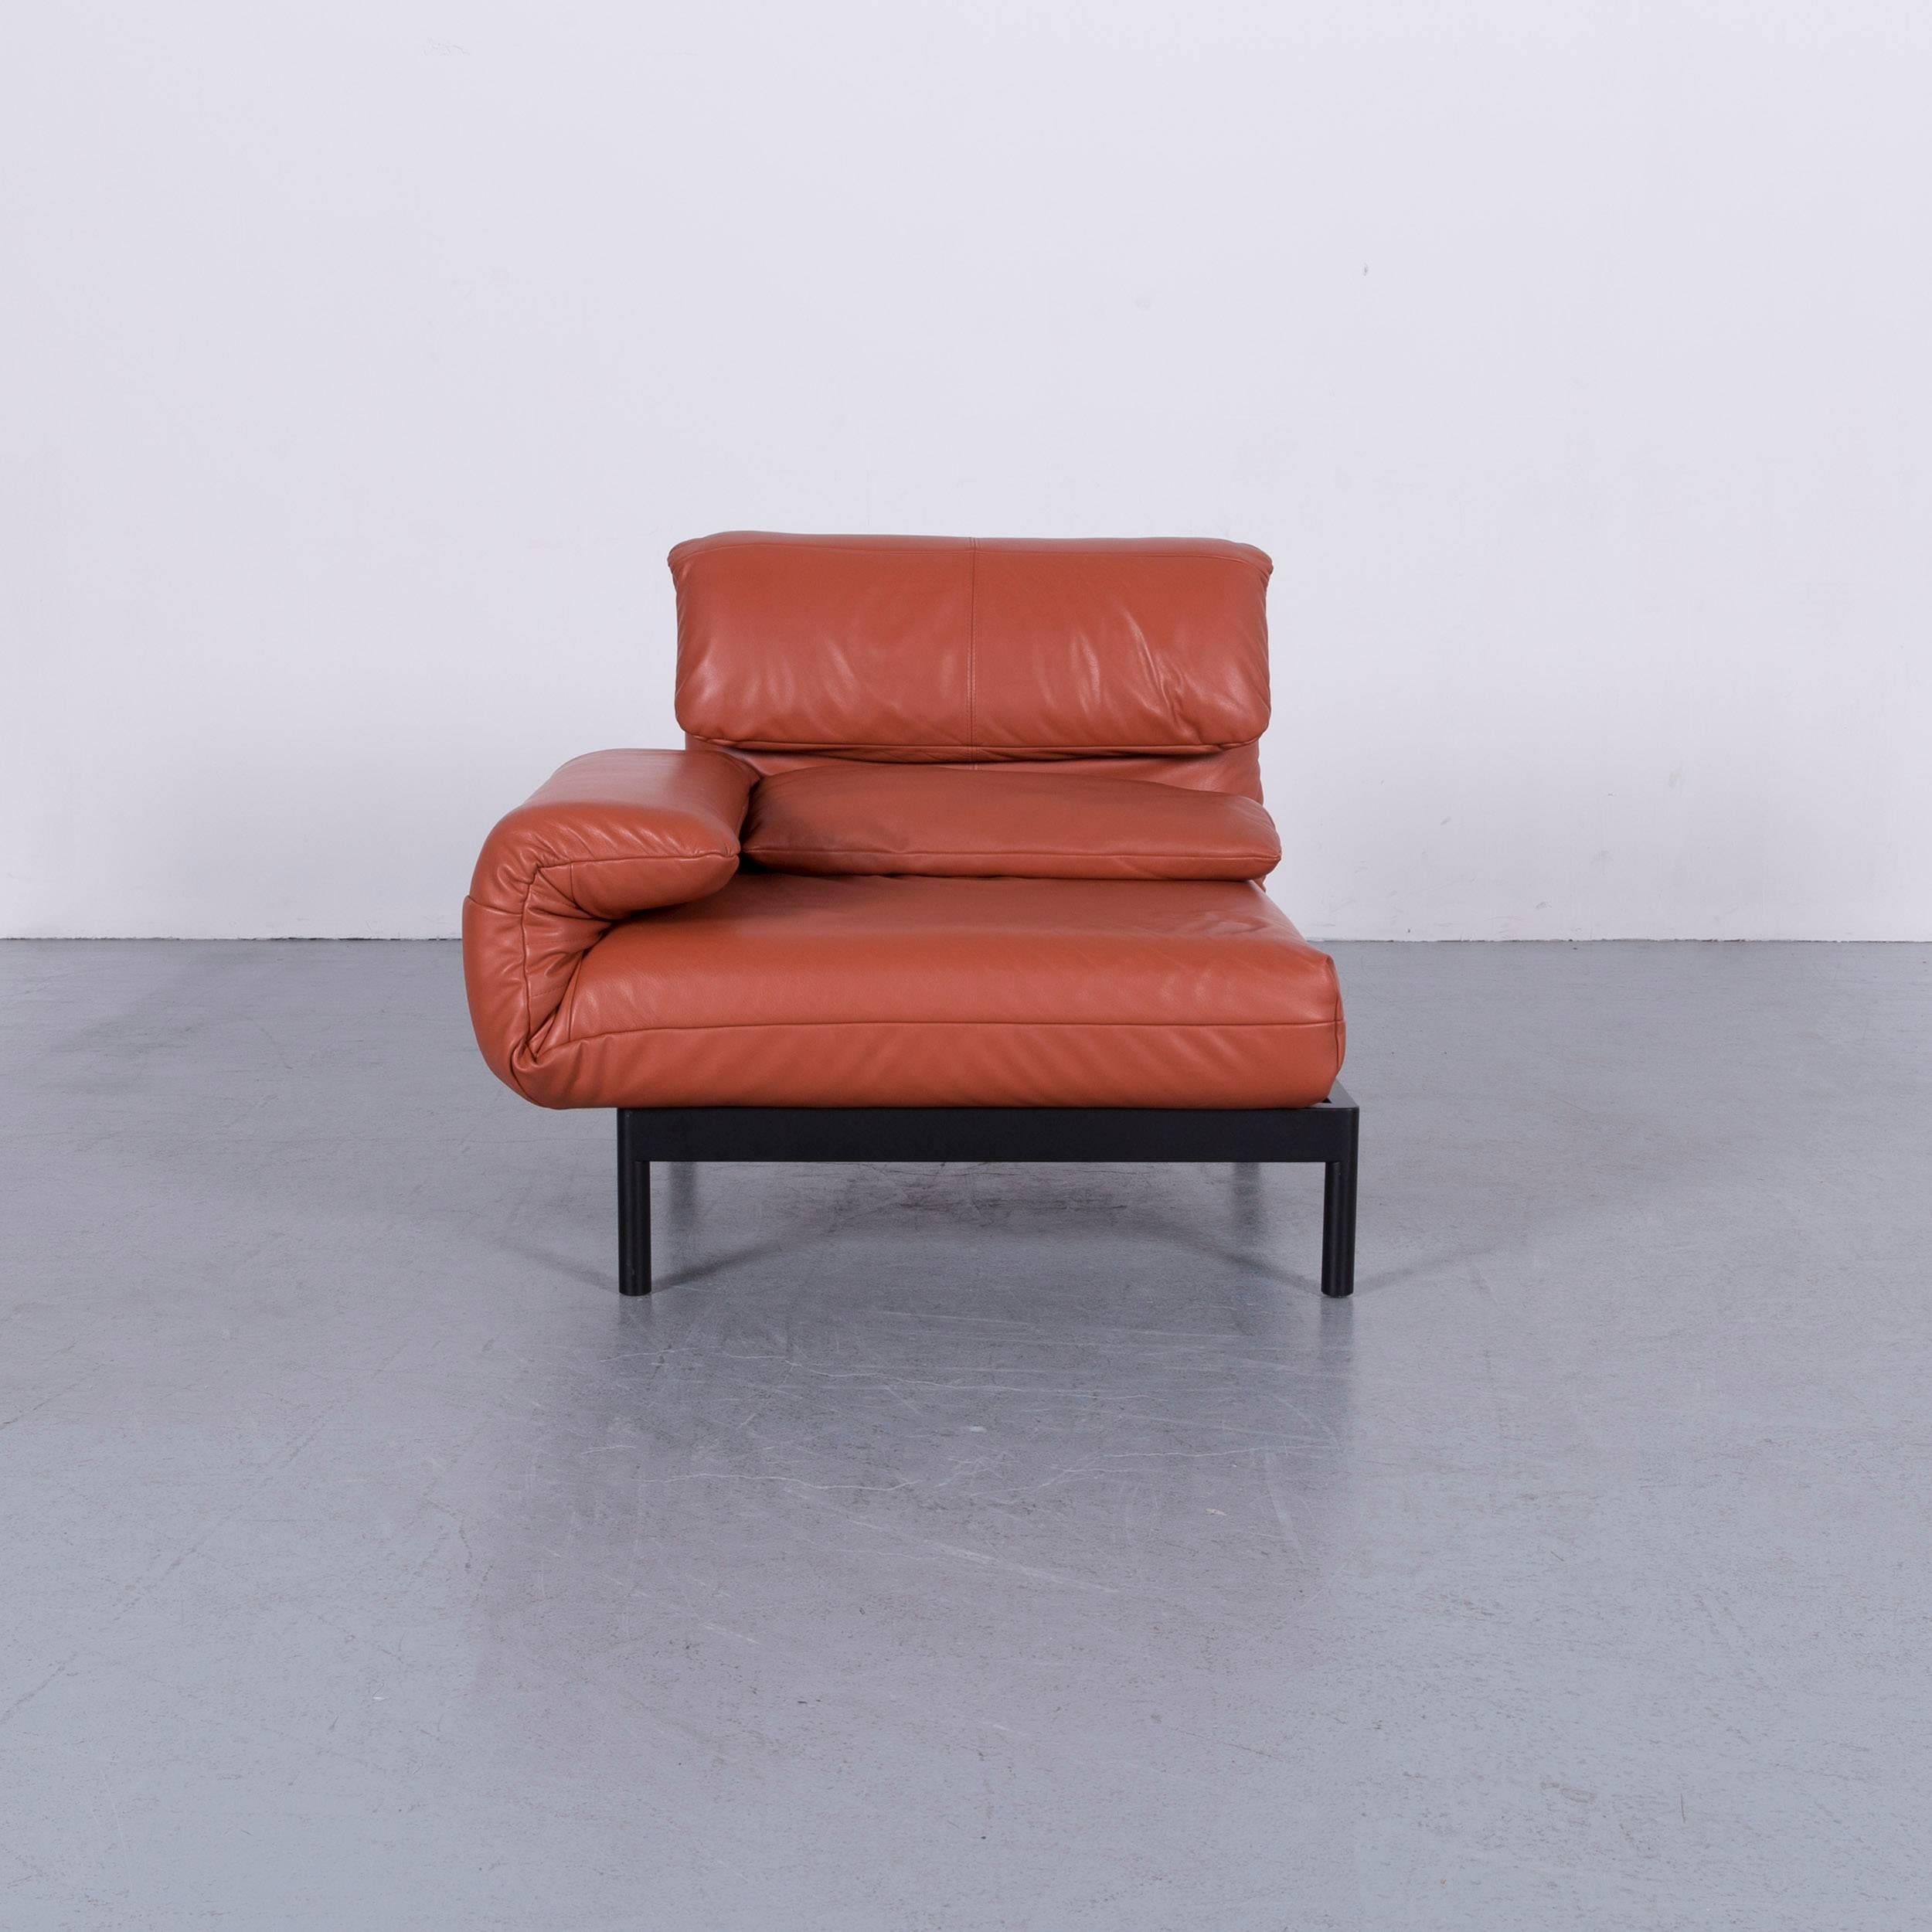 We bring to you a Rolf Benz Plura leather armchair red orange one-seat couch.













  